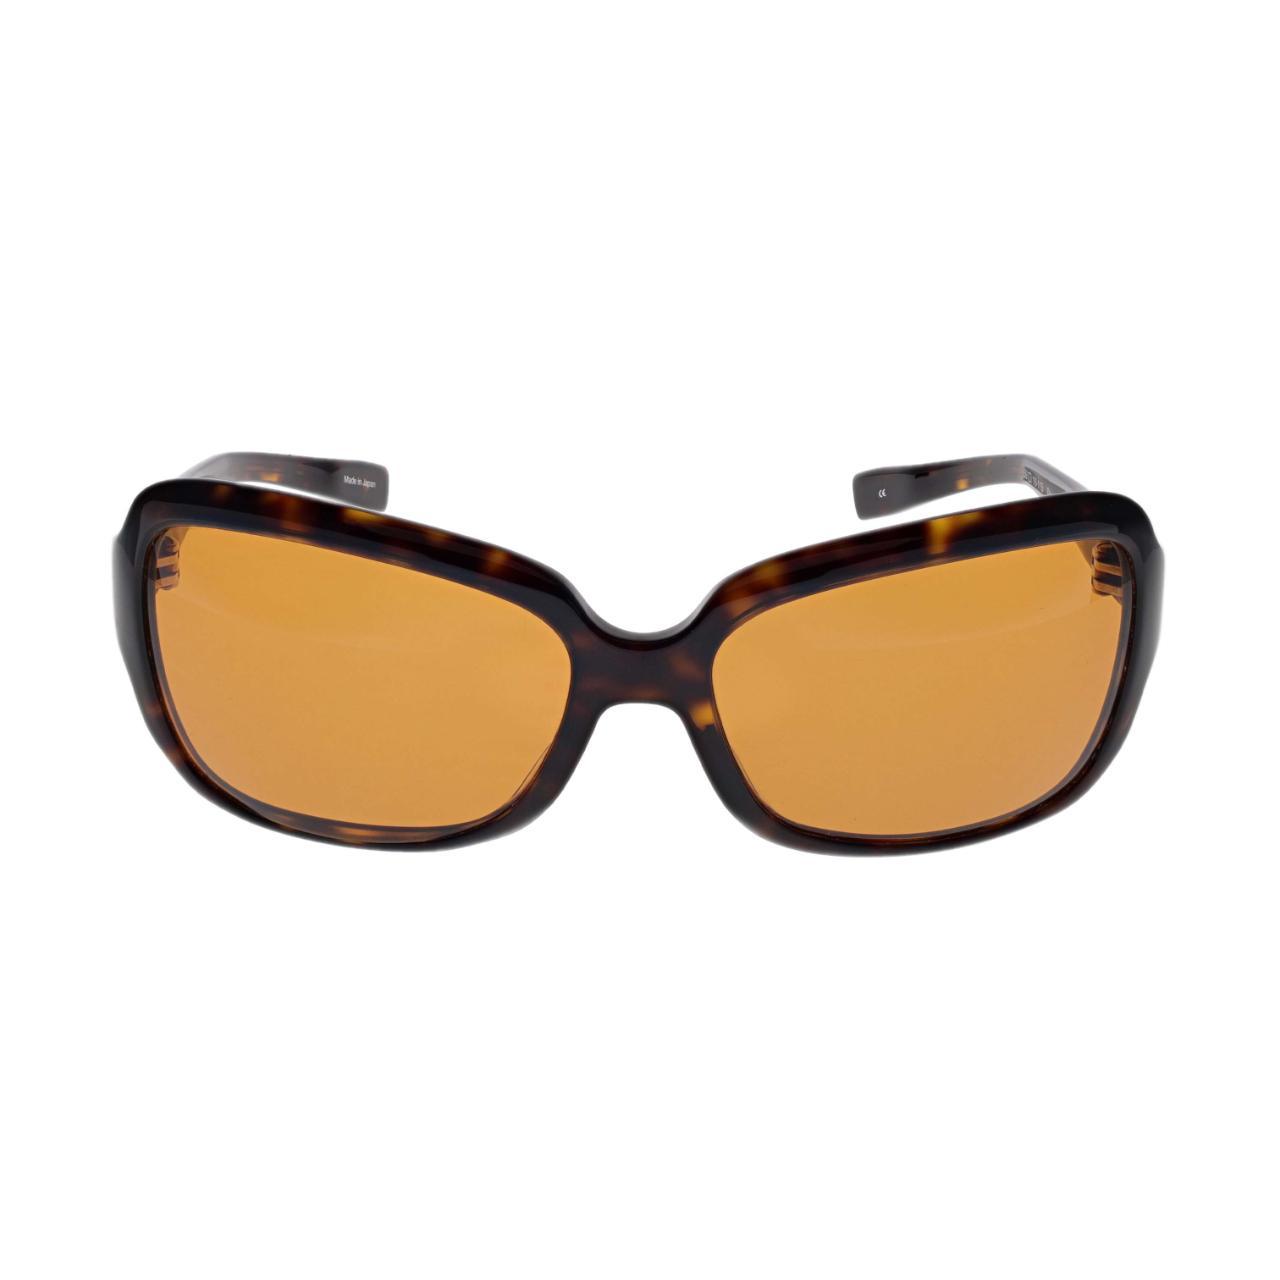 Product Image 2 - OLIVER PEOPLES DUNAWAY SUNGLASSES -